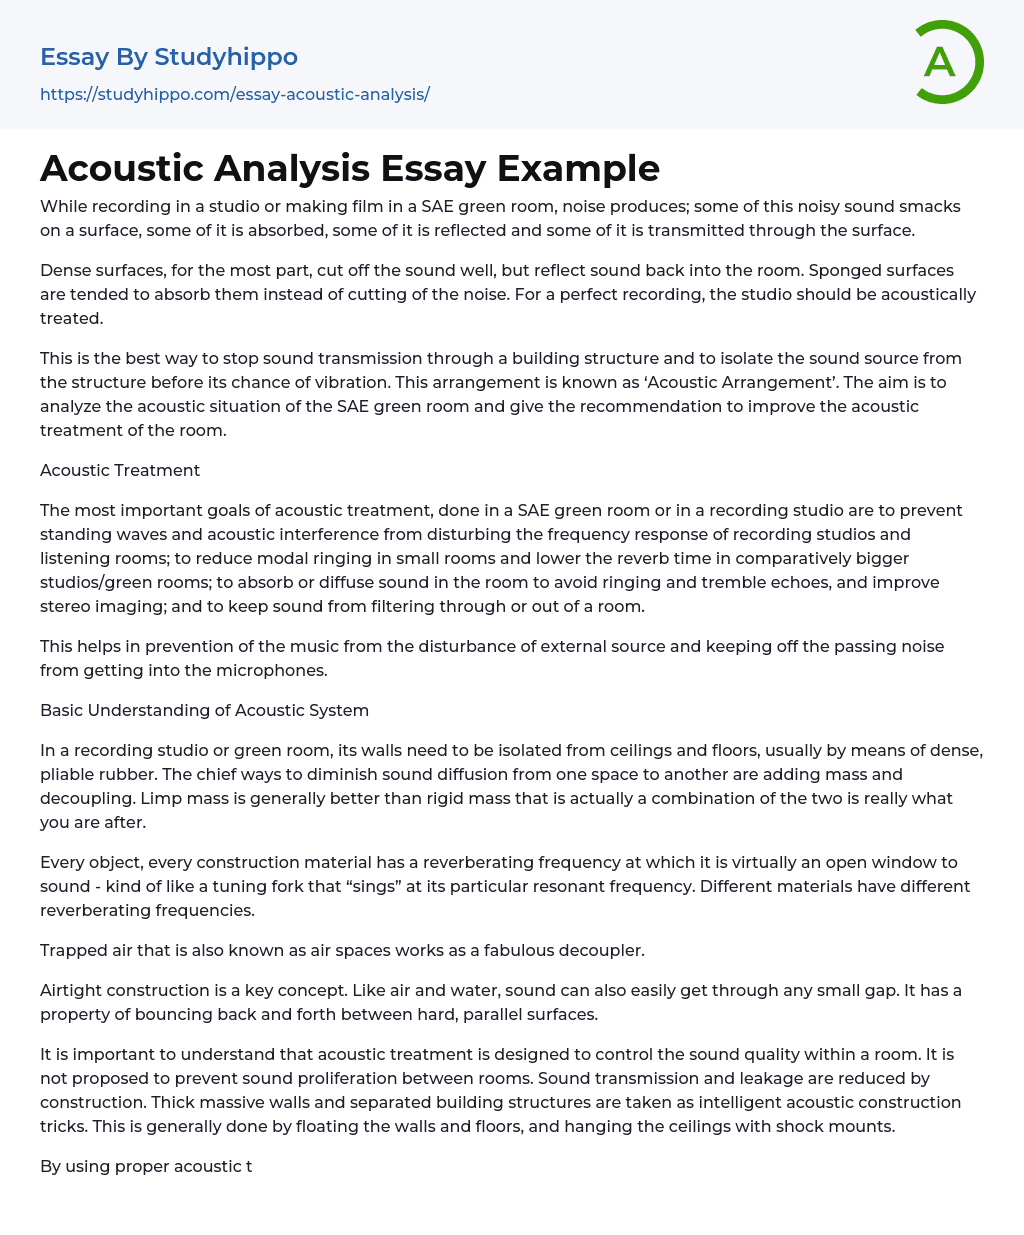 Acoustic Analysis Essay Example